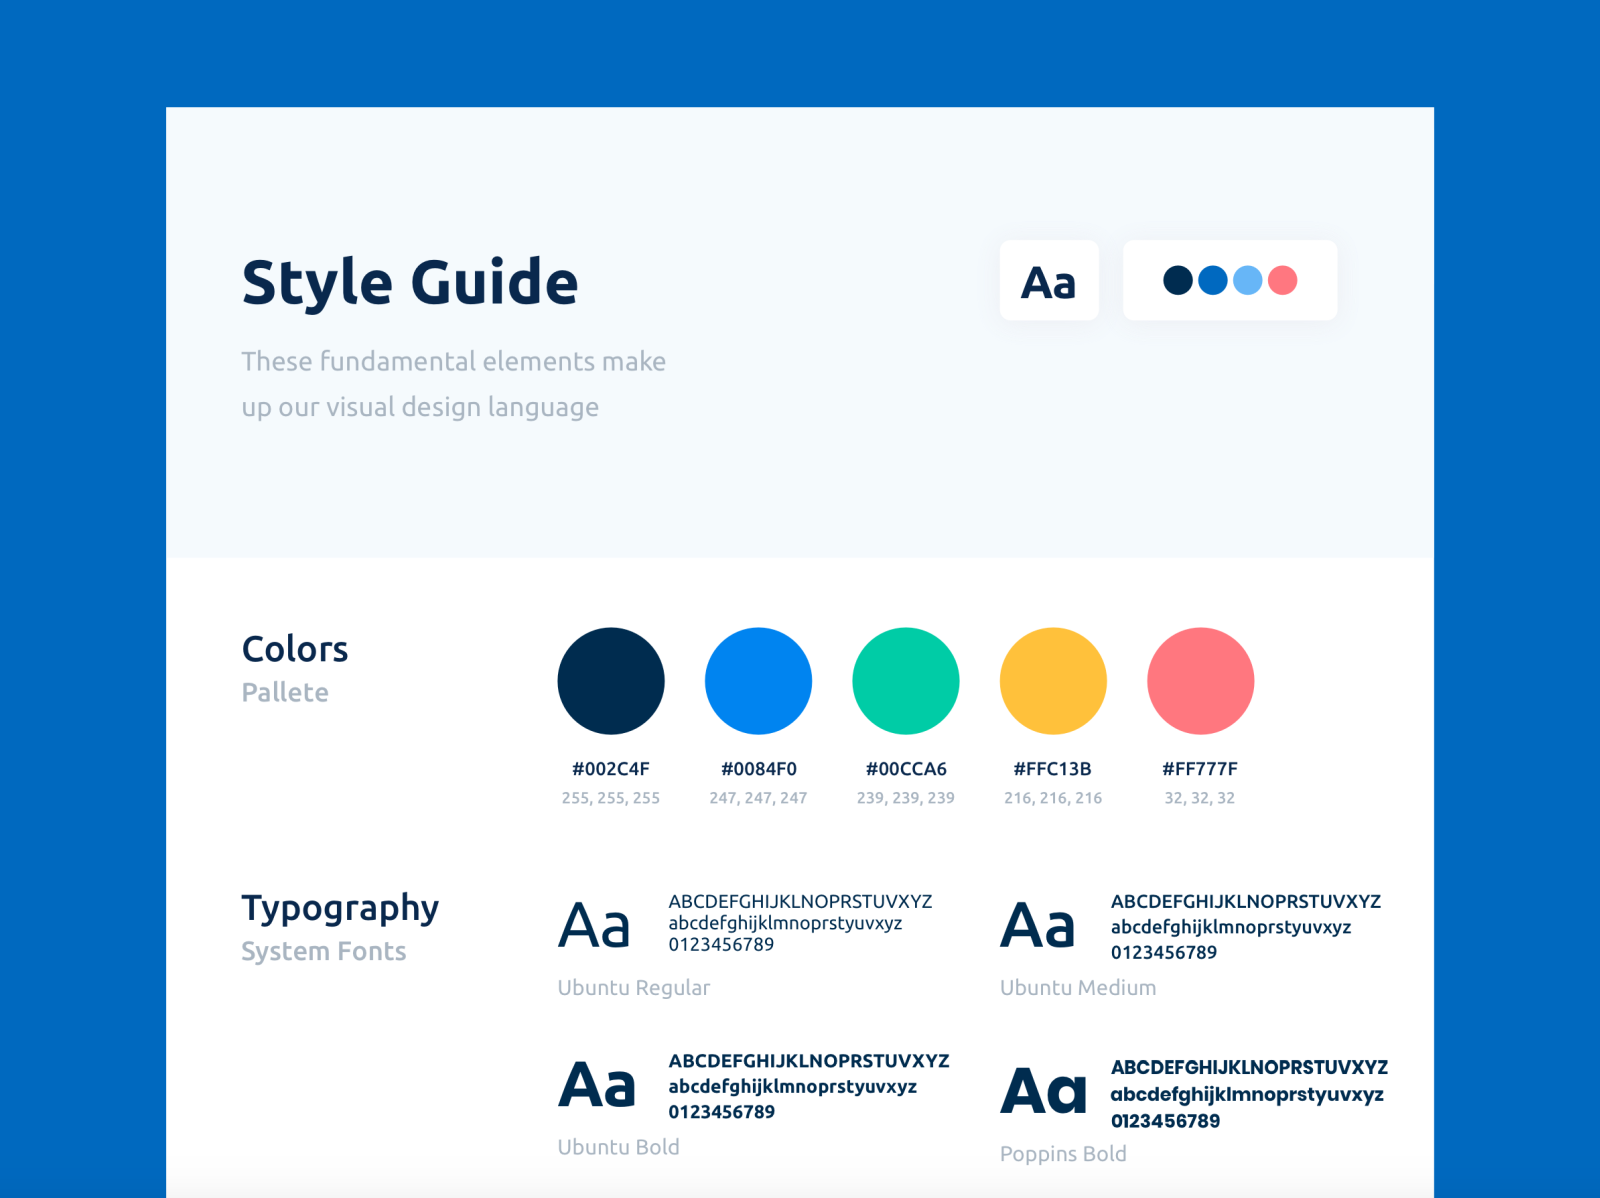 Style Guide by Диана Понизова on Dribbble